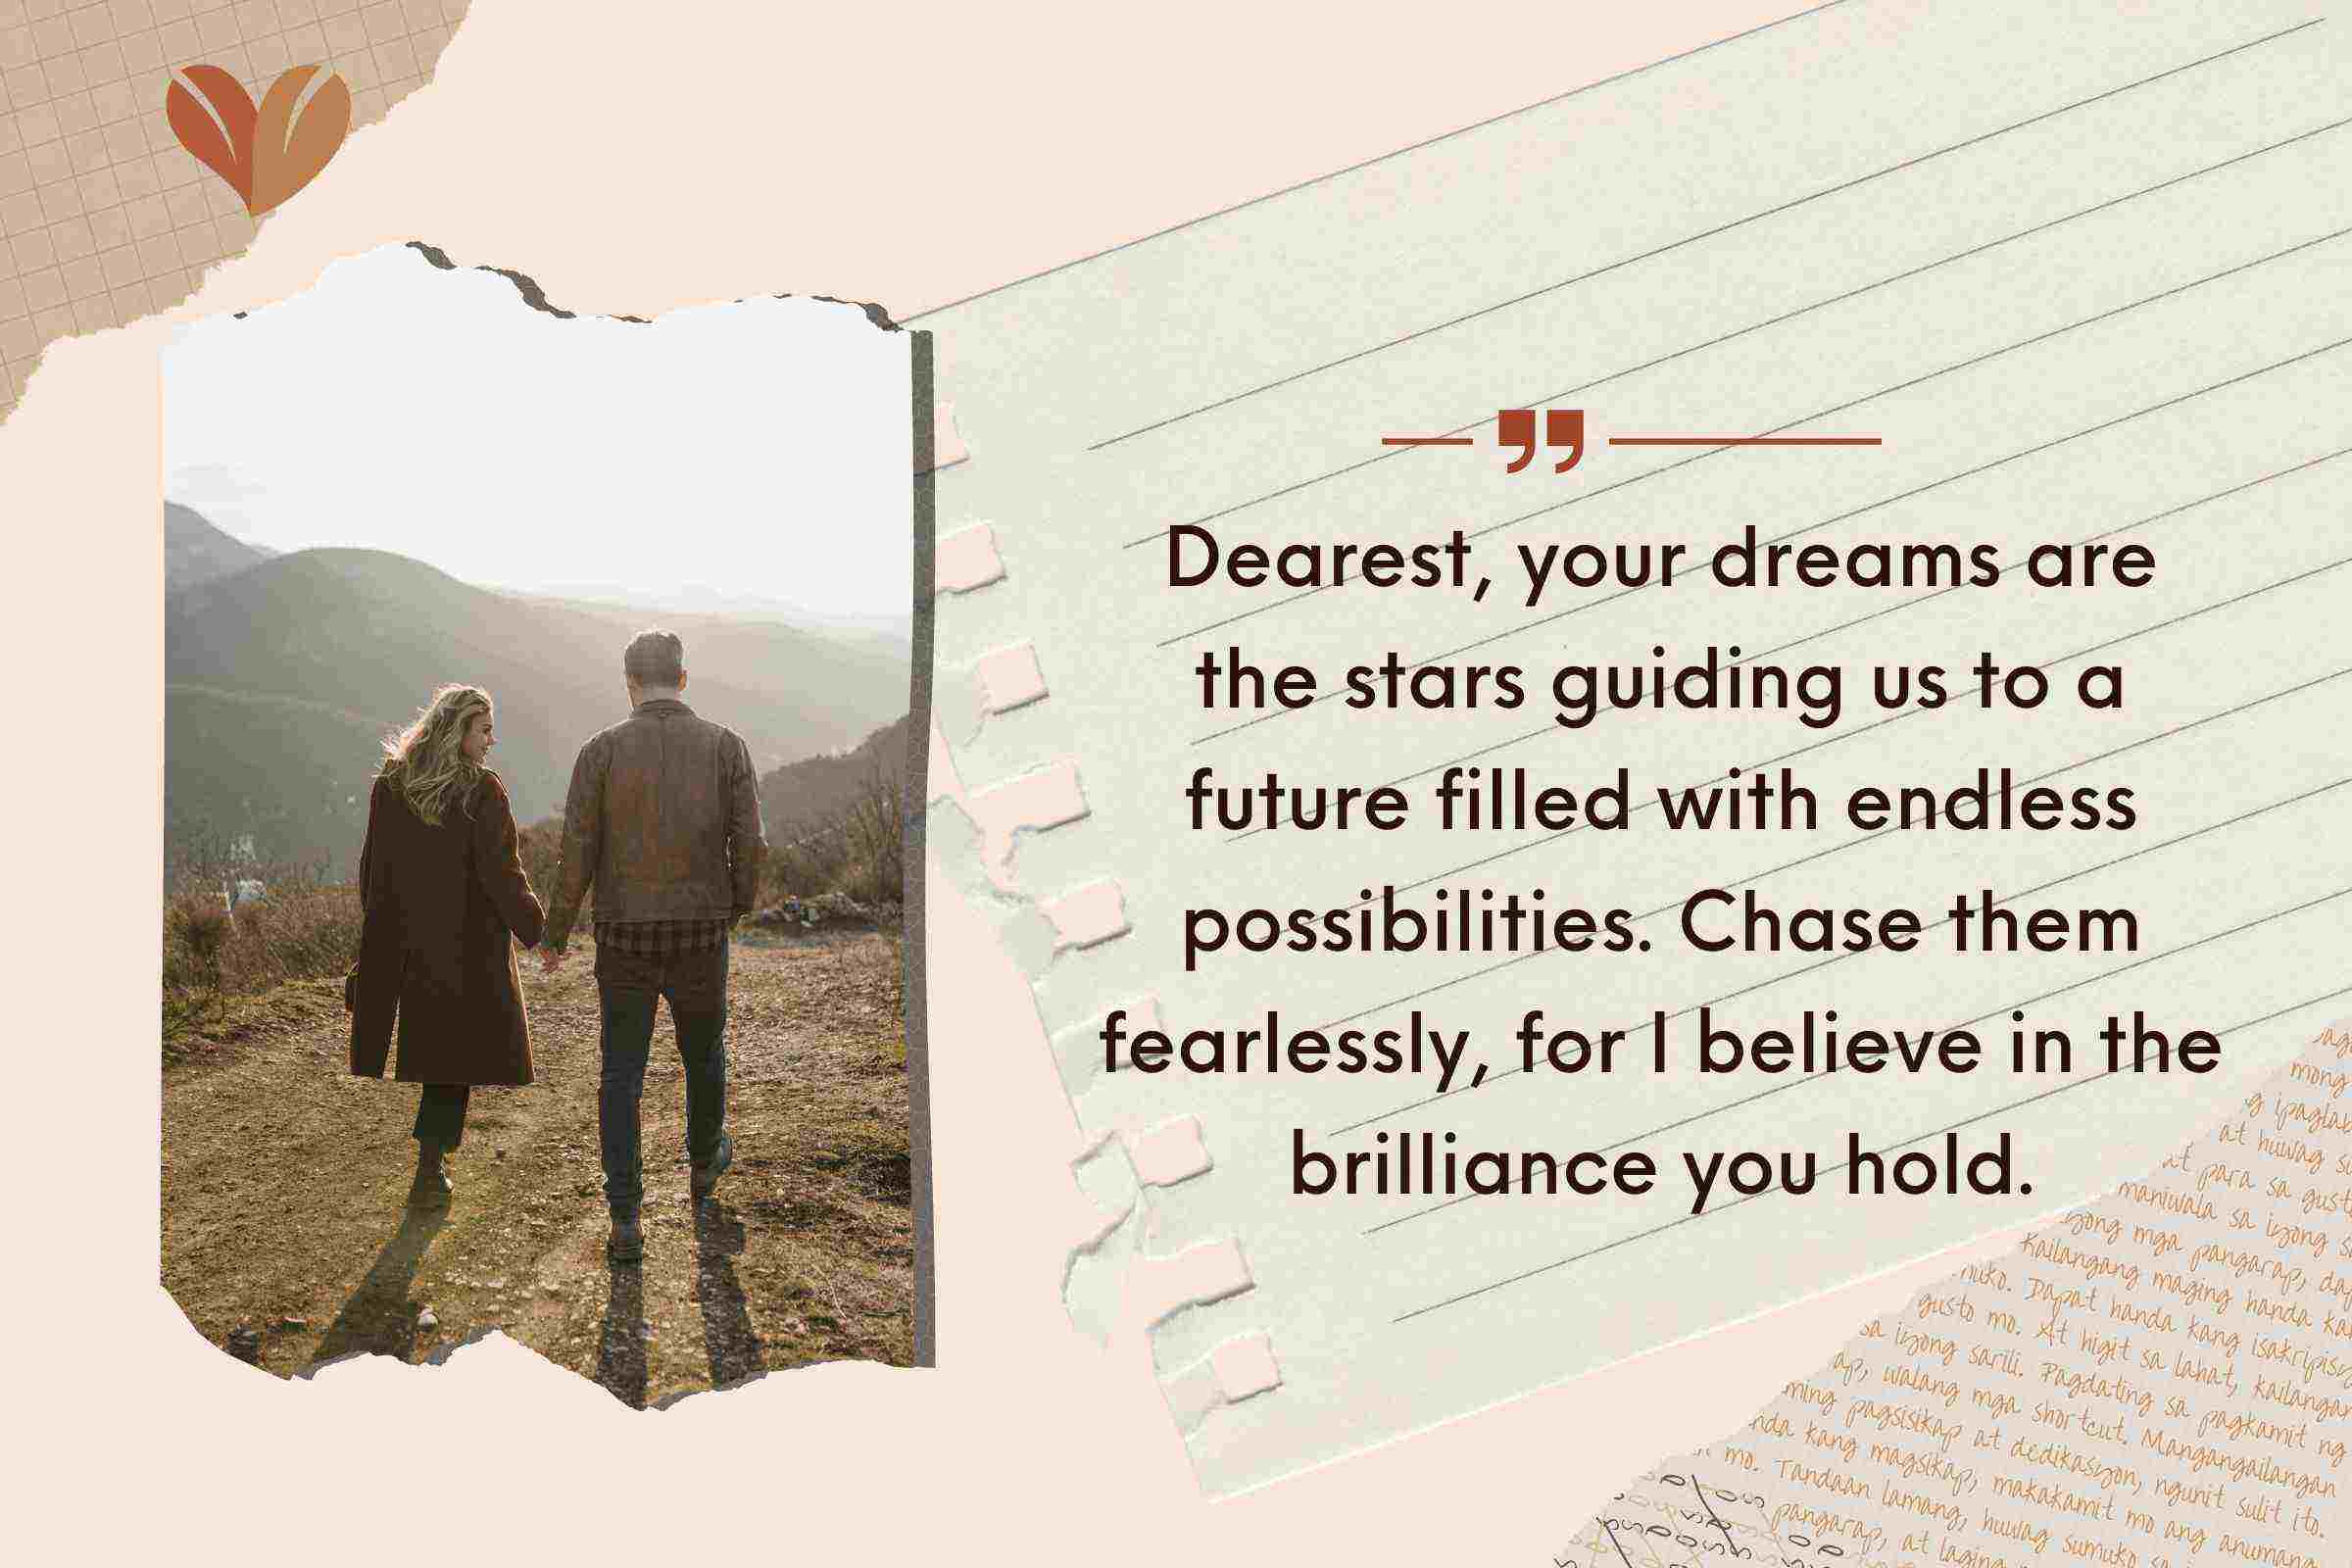 Dearest, your dreams are the stars guiding us to a future filled with endless possibilities.